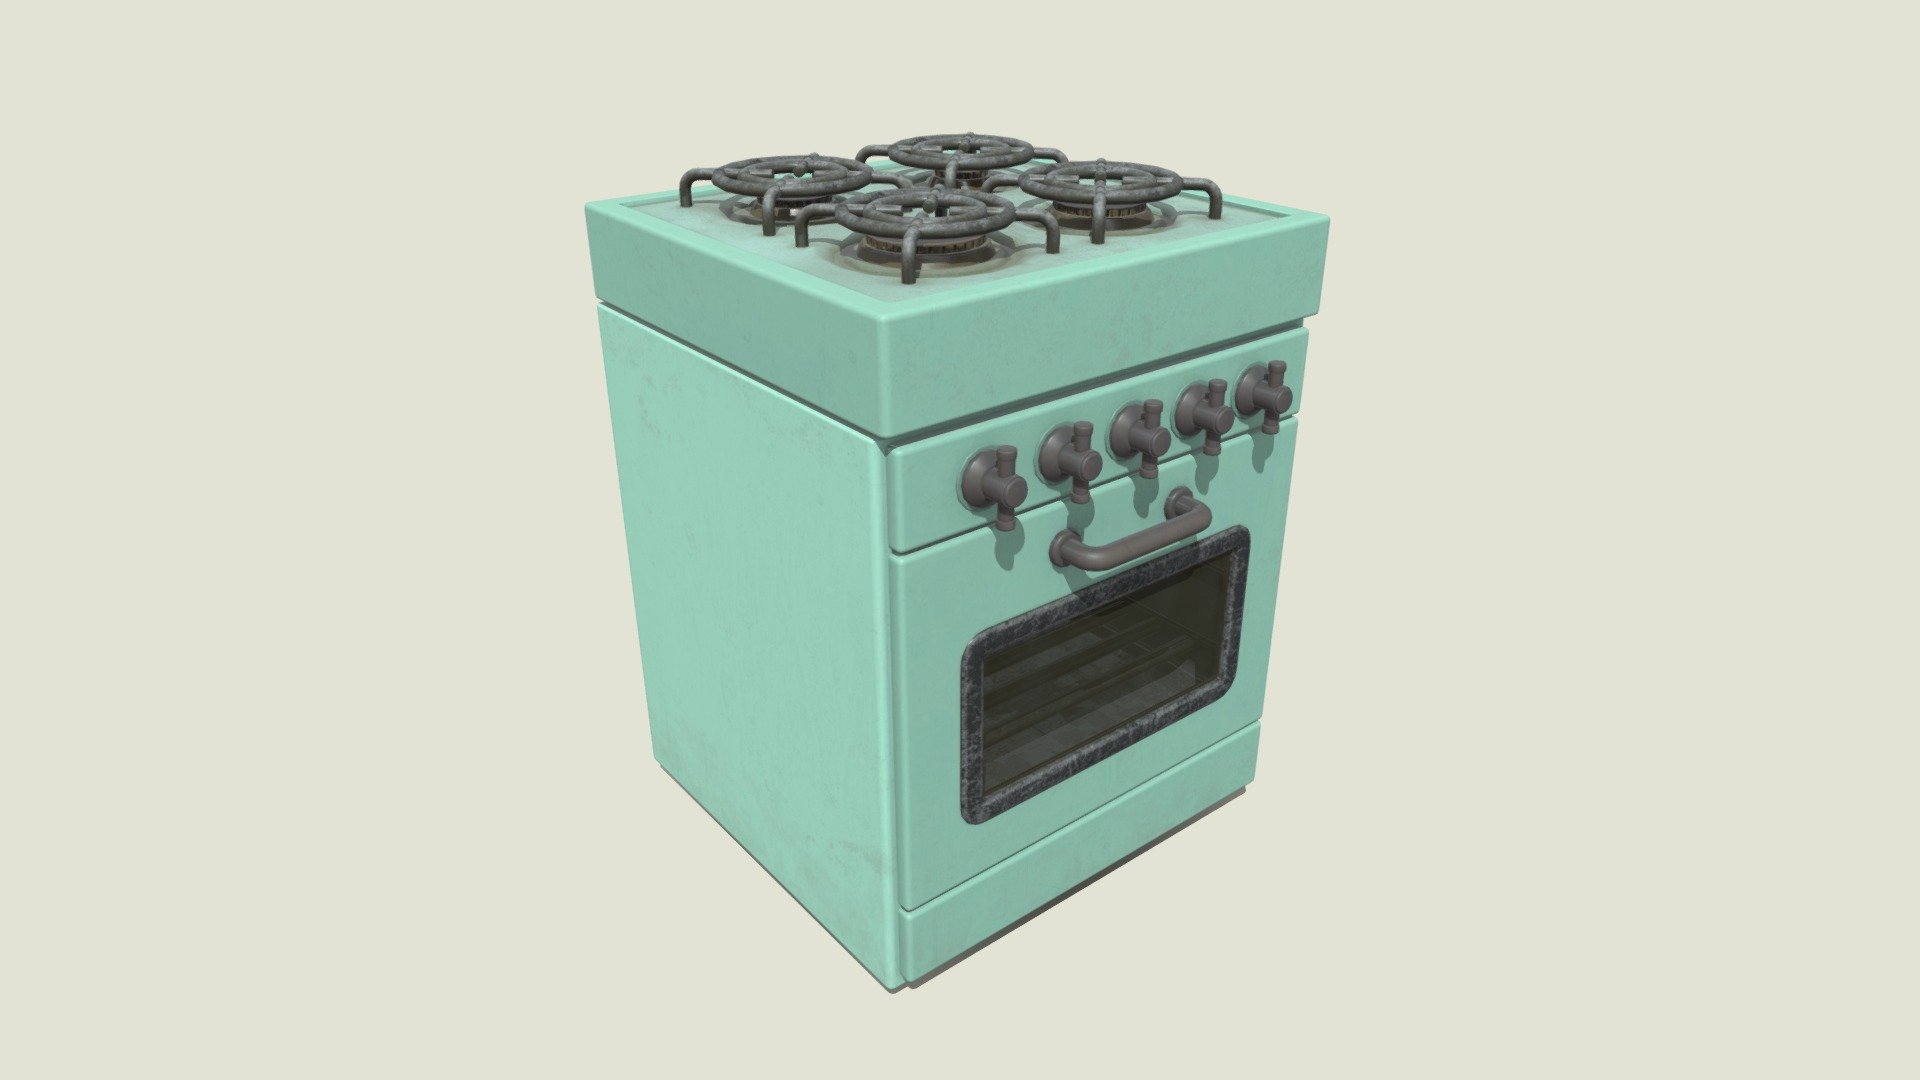 Stylized Low-poly Retro Oven 3d model made in 3ds Max 2022 and textured in Substance Painter

Model details:




Every model part is named properly, model is centered to the middle of its bottom part and placed to 0.0.0 scene coordinates

Model has 9468 polygons and 9494 vertices

Everything is unwrapped to 2 UV maps: Oven has 2k textures, Glass has a set of 1k textures accordingly

Model pack includes .fbx, .max, .obj, .blend files, textures are not embedded and have to be plugged in manually!

FBX files are provided for 2014/2015, 2016/2017 and 2020 versions. Sometimes .fbx files get corrupted so I've packed multiple versions + an obj. version

Max files include 2021, 2020, 2019 and .max versions

Textures pack includes Arnold, Corona, Unity hd and Vray .png textures, as well as .png, .jpeg and .targa UE4 textures

Nothing is animated

Weighted normals are applied

You might want to rescale model

Most metal parts share same UV map, same goes for knobs

As usual - best wishes &amp; have a nice day! - Stylized Low-poly Retro Oven - 3D model by Art-Teeves 3d model